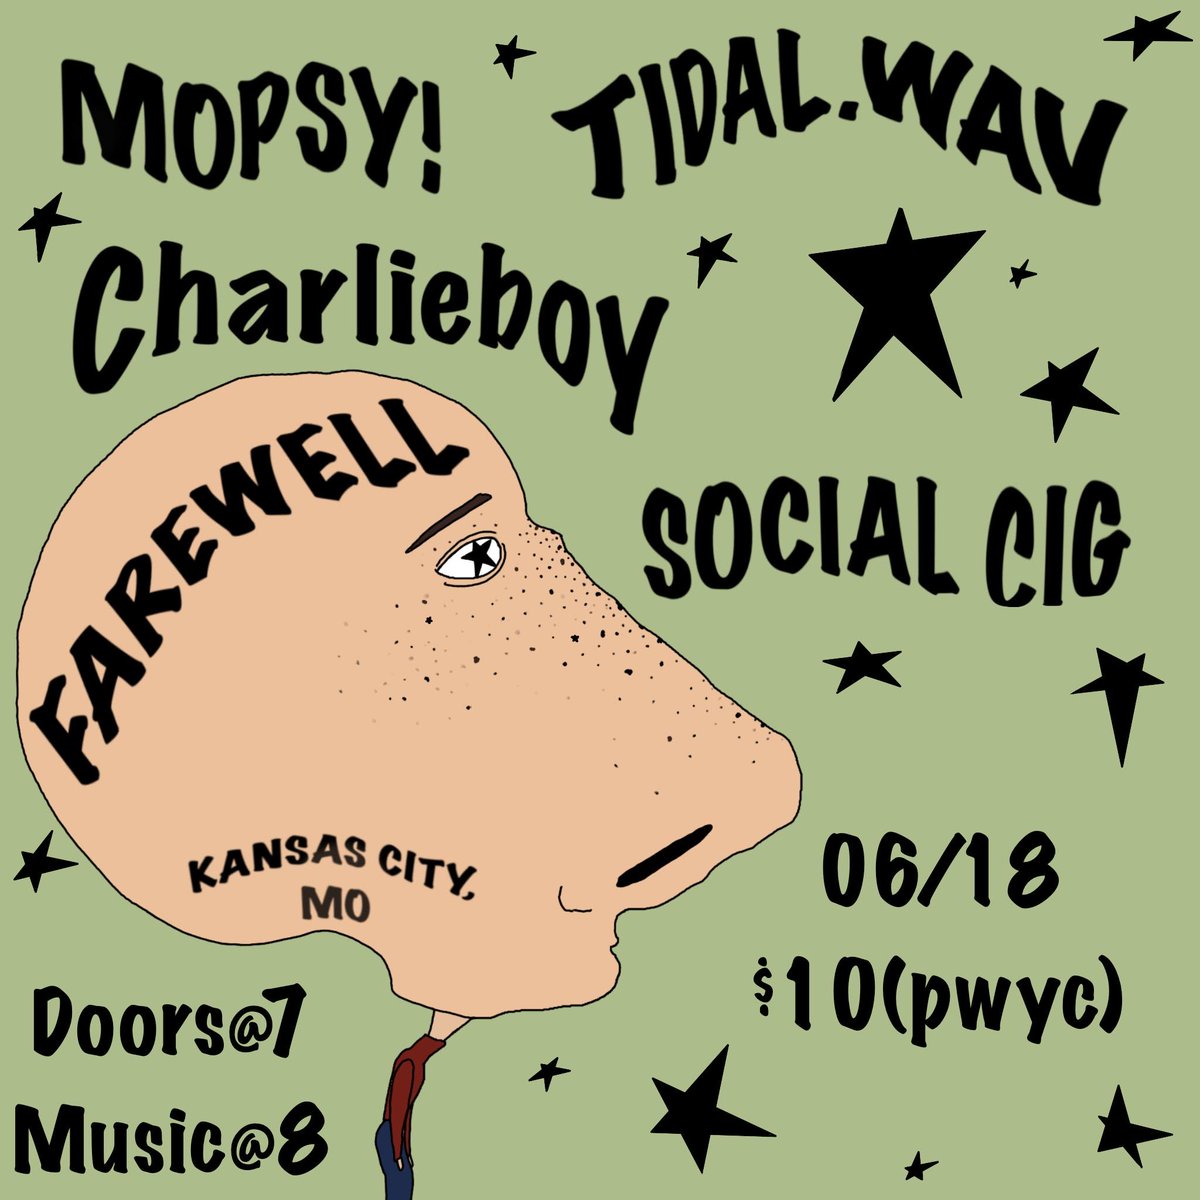 Tuesday, June 18: La Crosse, Wisconsin math rockers Charlieboy and Milwaukee's Social Cig will visit Kansas City for a gig with locals Tidal.wav and Mopsy. Music at 8pm. $10 (PWYC). 21+ unless with parent/legal guardian.